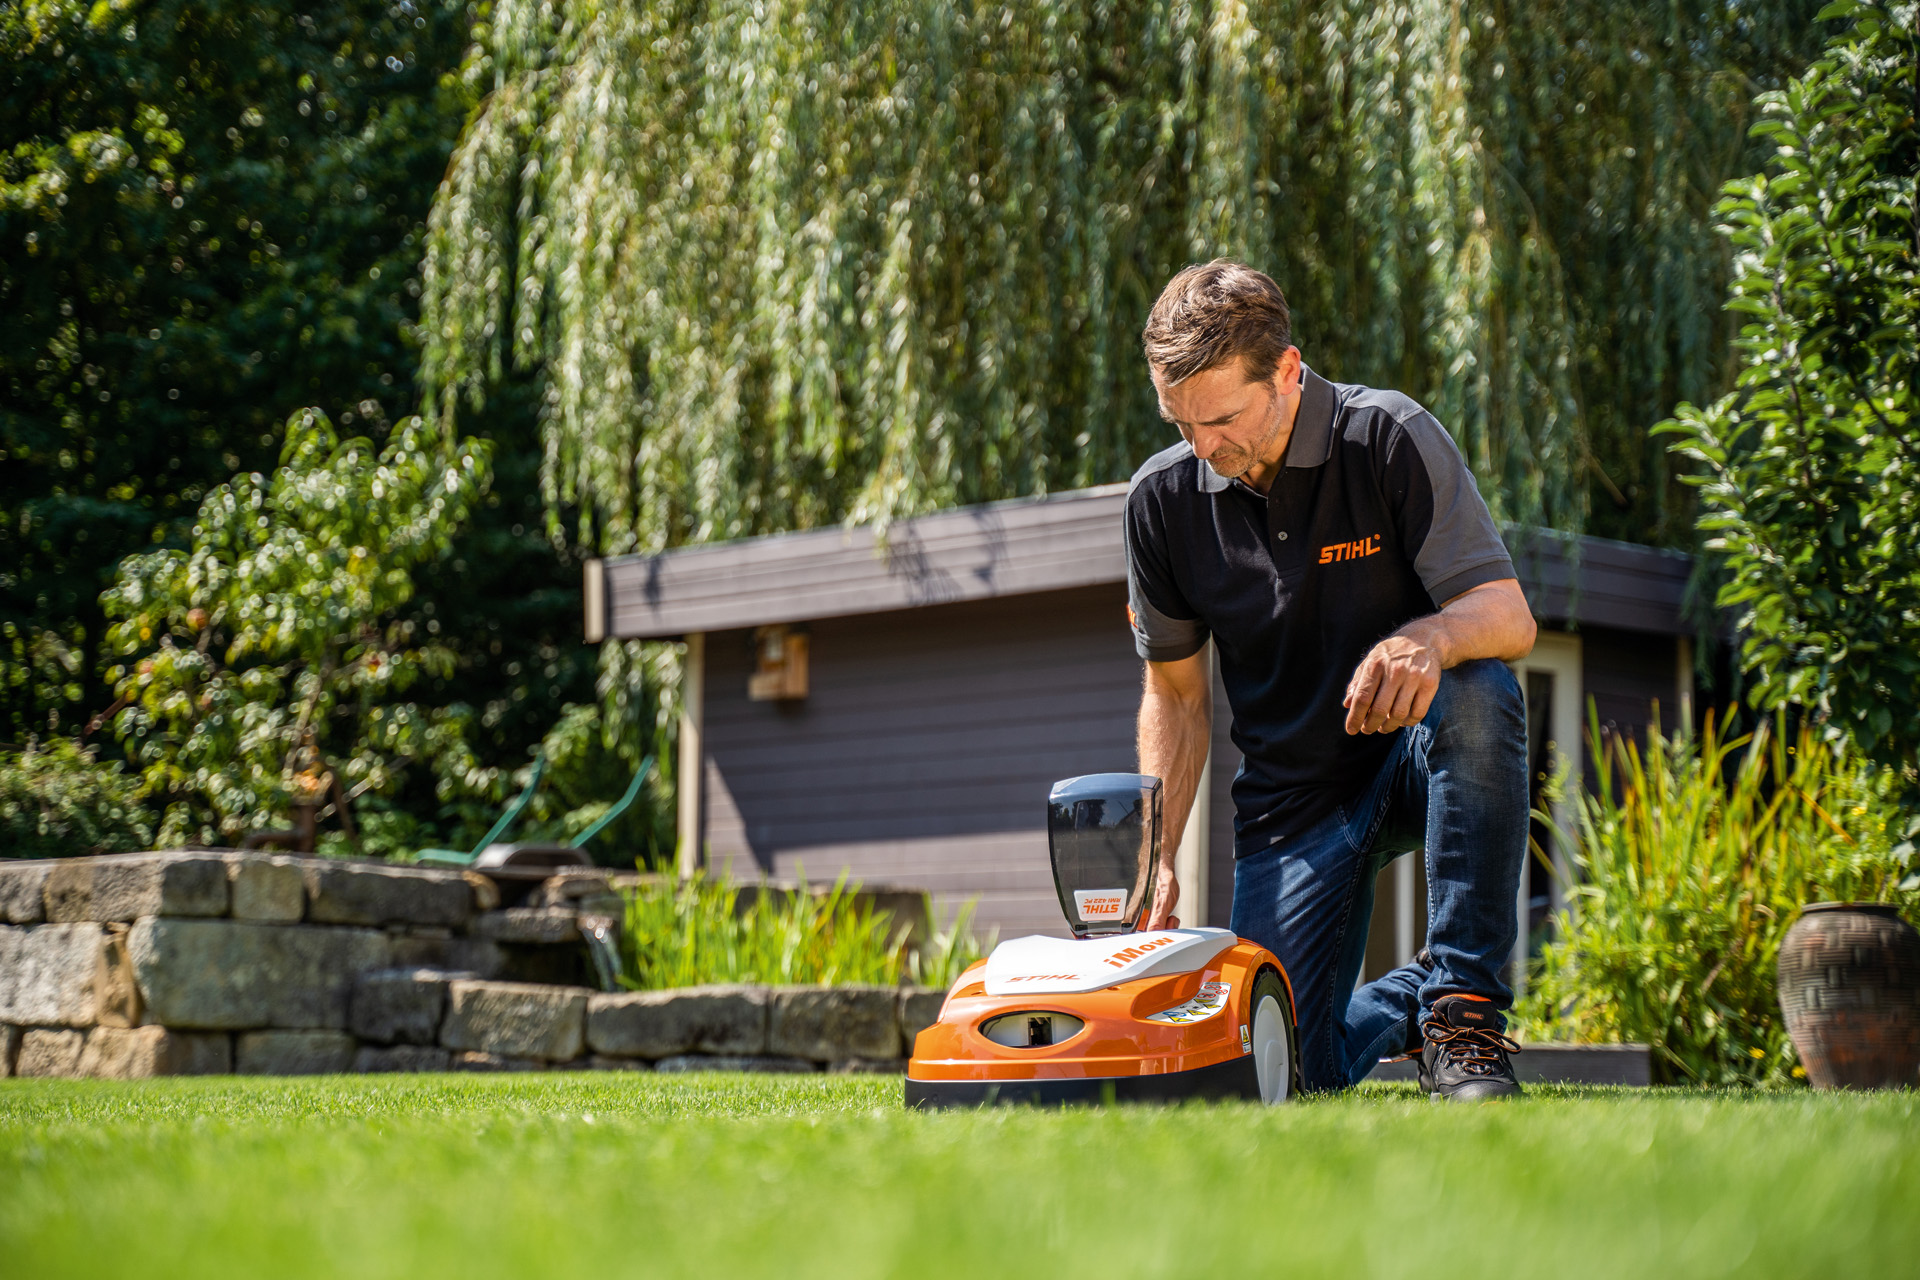 STIHL dealer programming in the mowing plan for a STIHL iMOW robotic mower in a garden